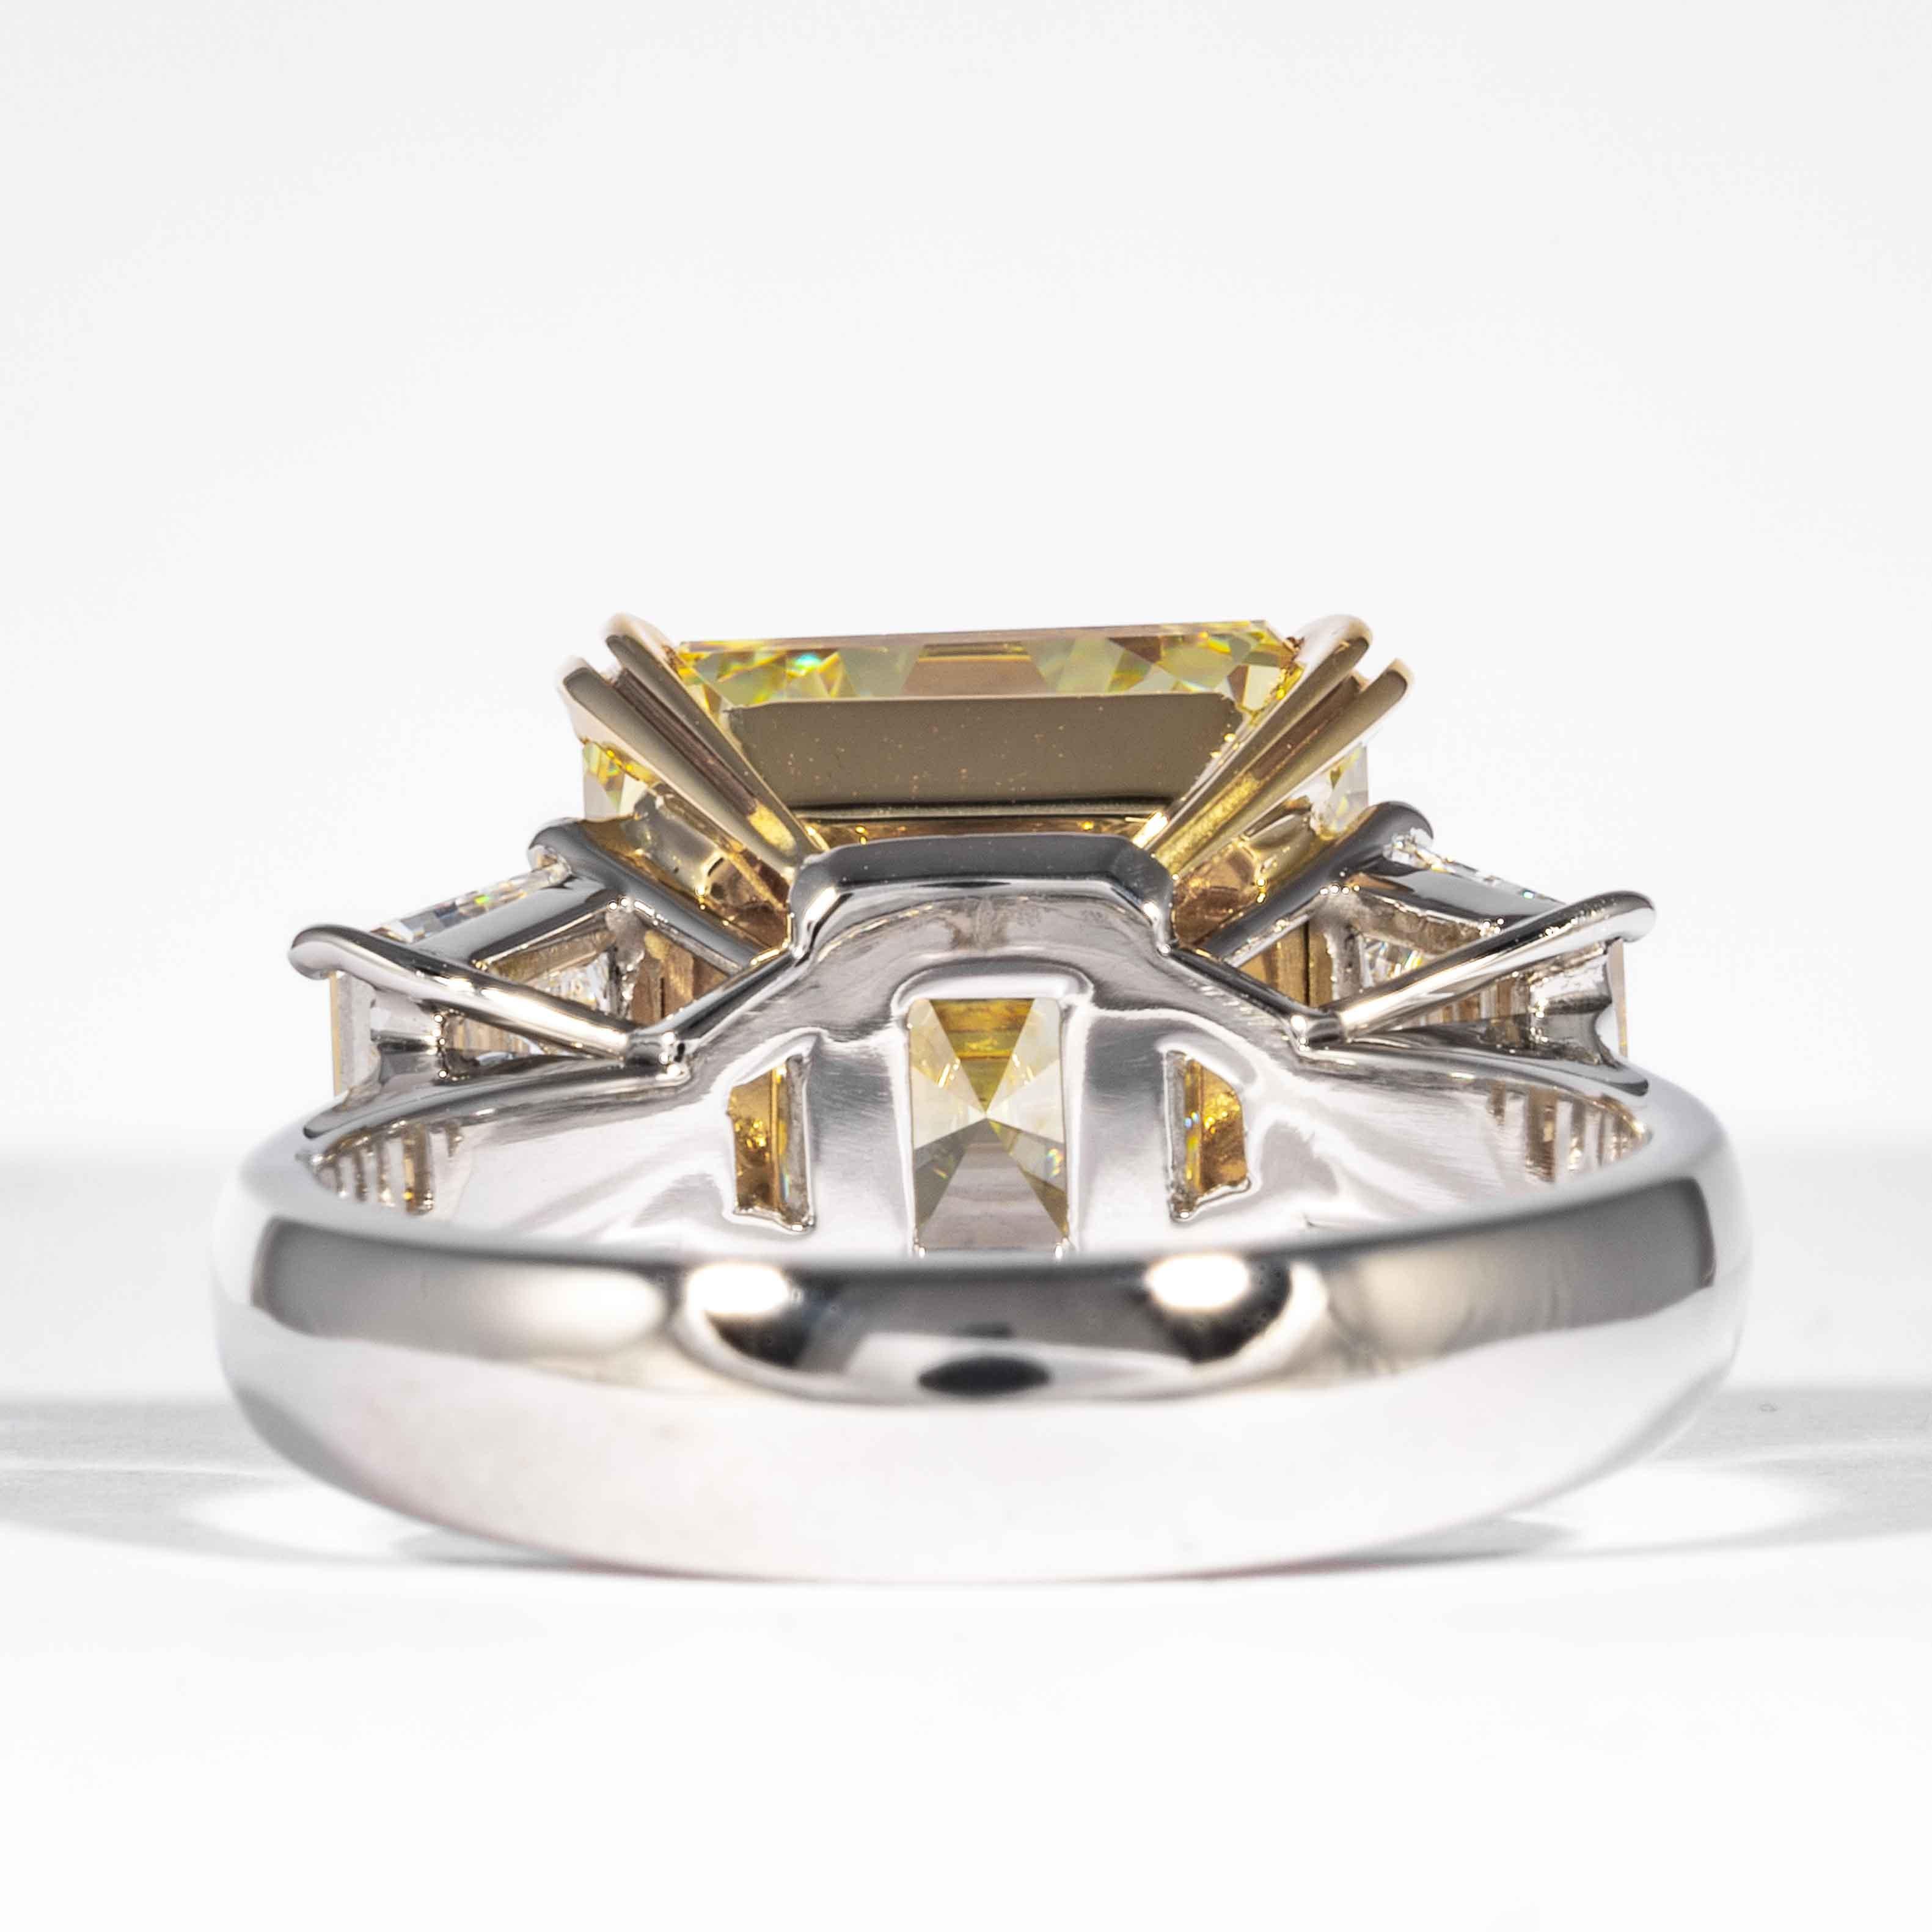 Shreve, Crump & Low GIA Certified 7.03 Ct Fancy Yellow Square Cut Diamond Ring In New Condition For Sale In Boston, MA